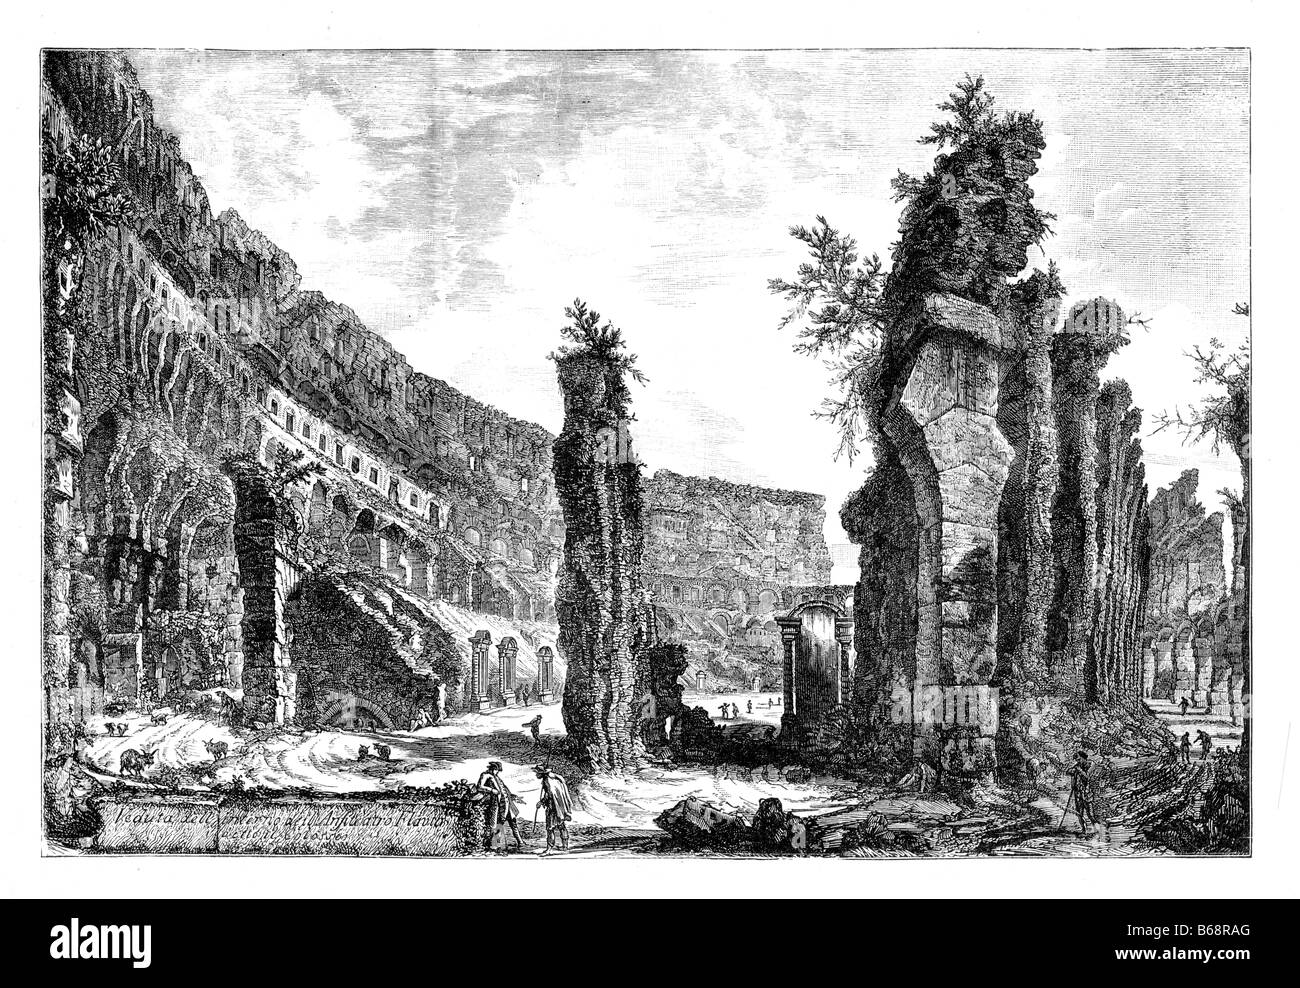 The Coliseum Rome in the 18th Century Illustration Stock Photo